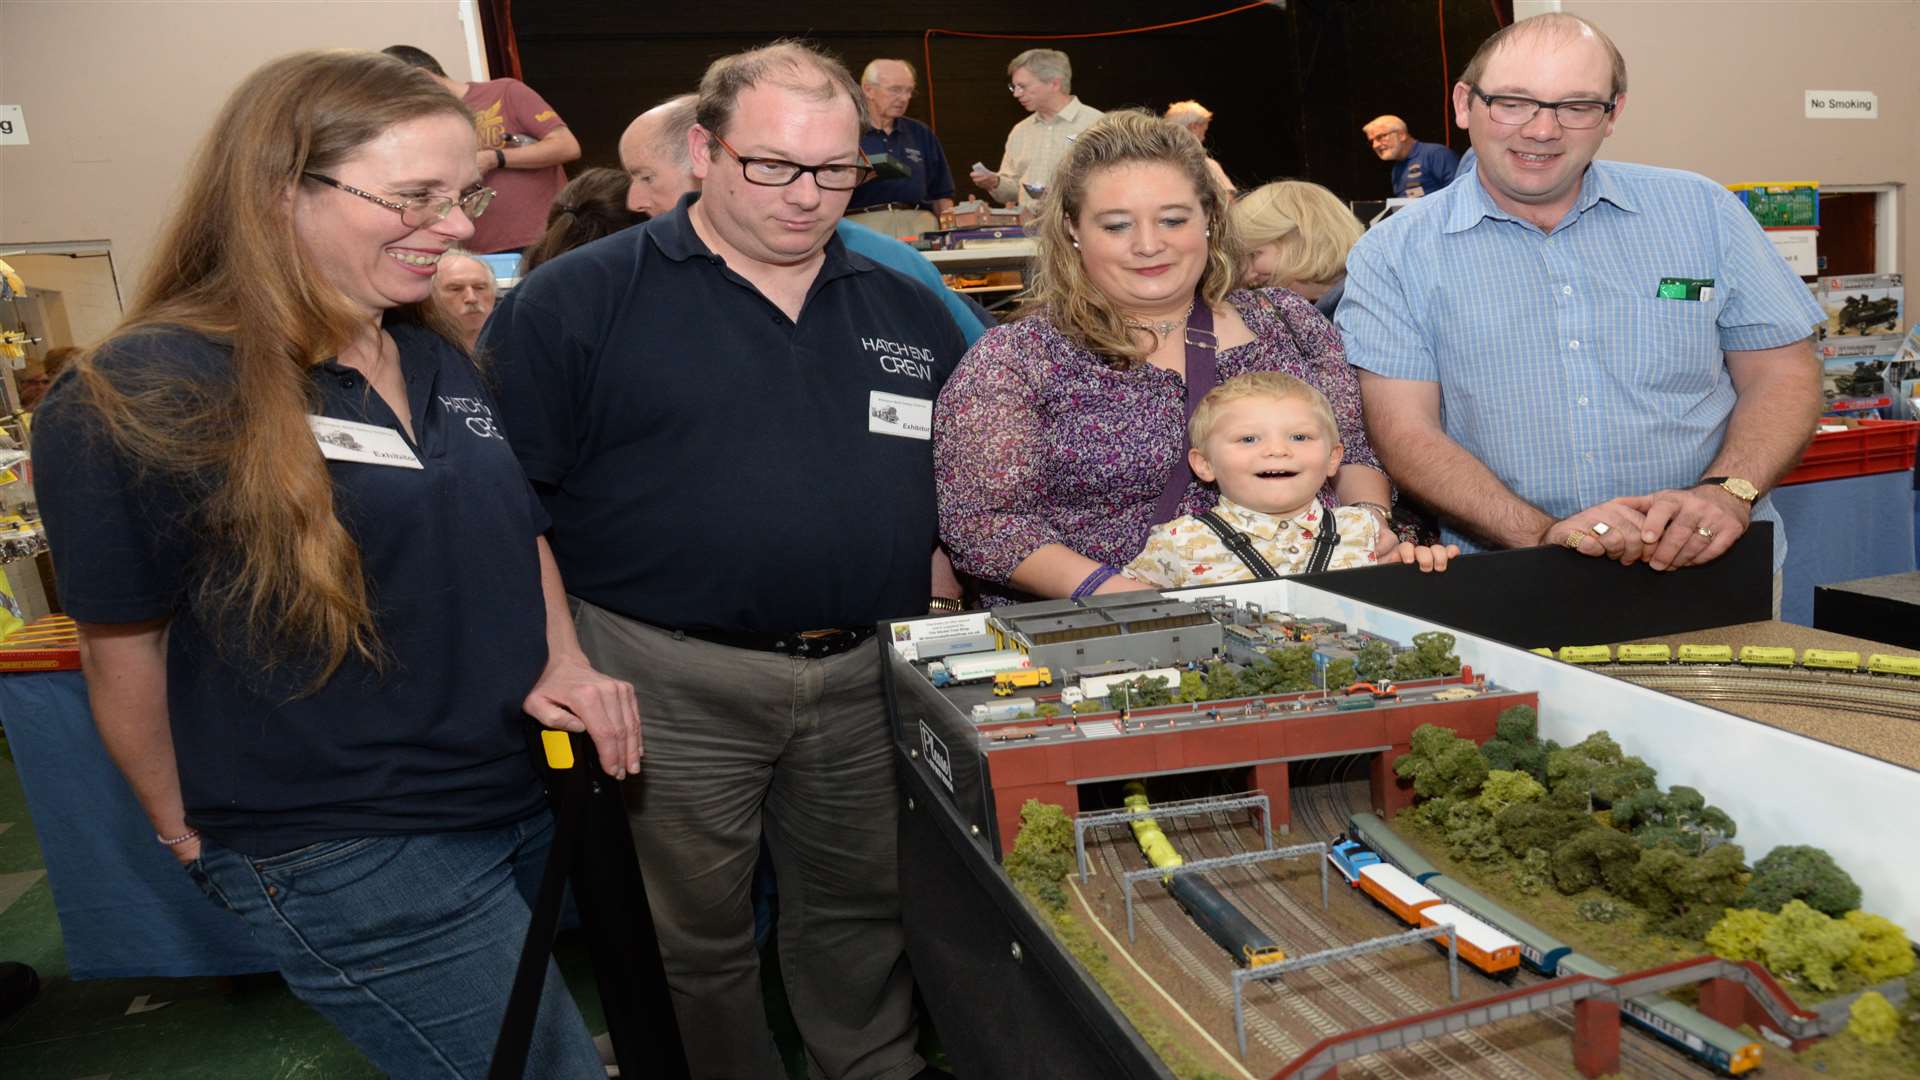 Susan Lee and Laurence Williams part of the team who built the 'Hatch End' layout show off their layout to Nicola, Jacob, two and Richard Lewis at the charity model railway exhibition in St Michael's Church Hall, Wilmington on Saturday. Picture: Chris Davey